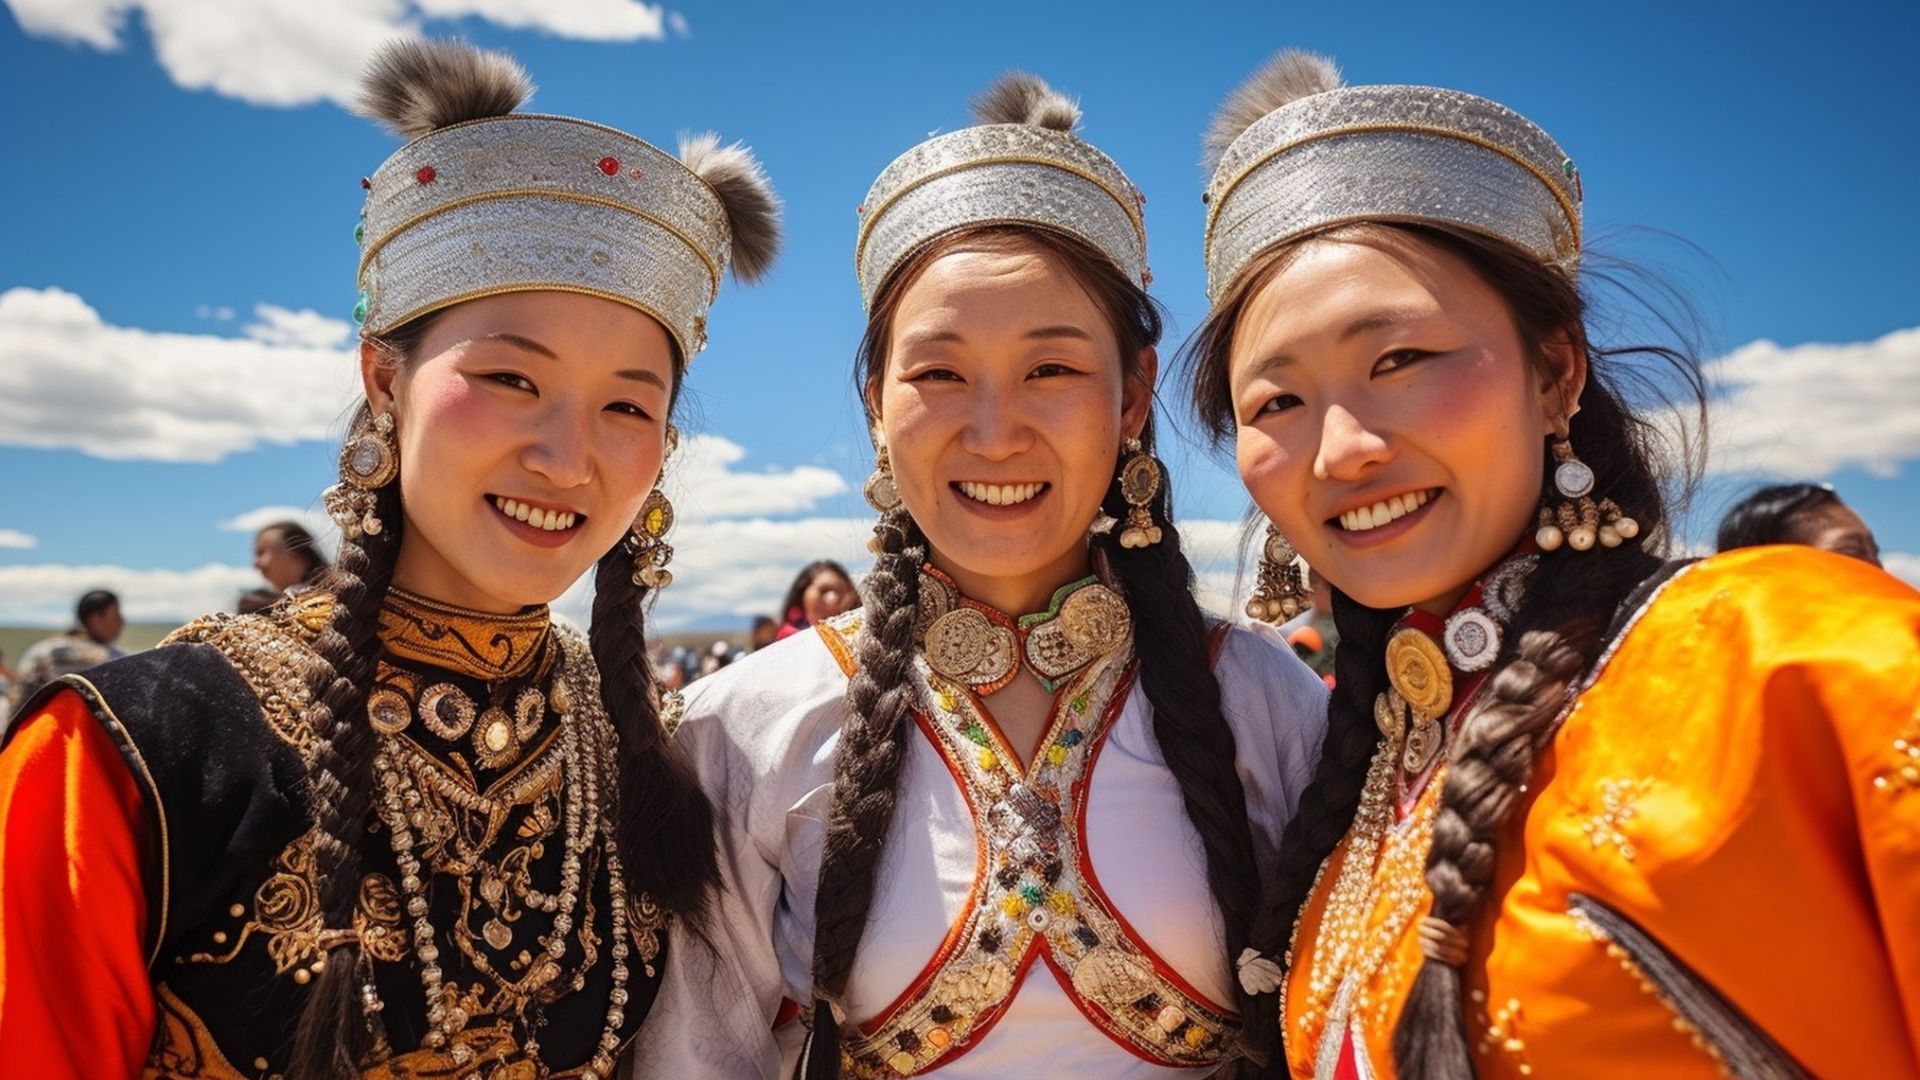 World Festivals July Naadam Manly Games in Mongolia